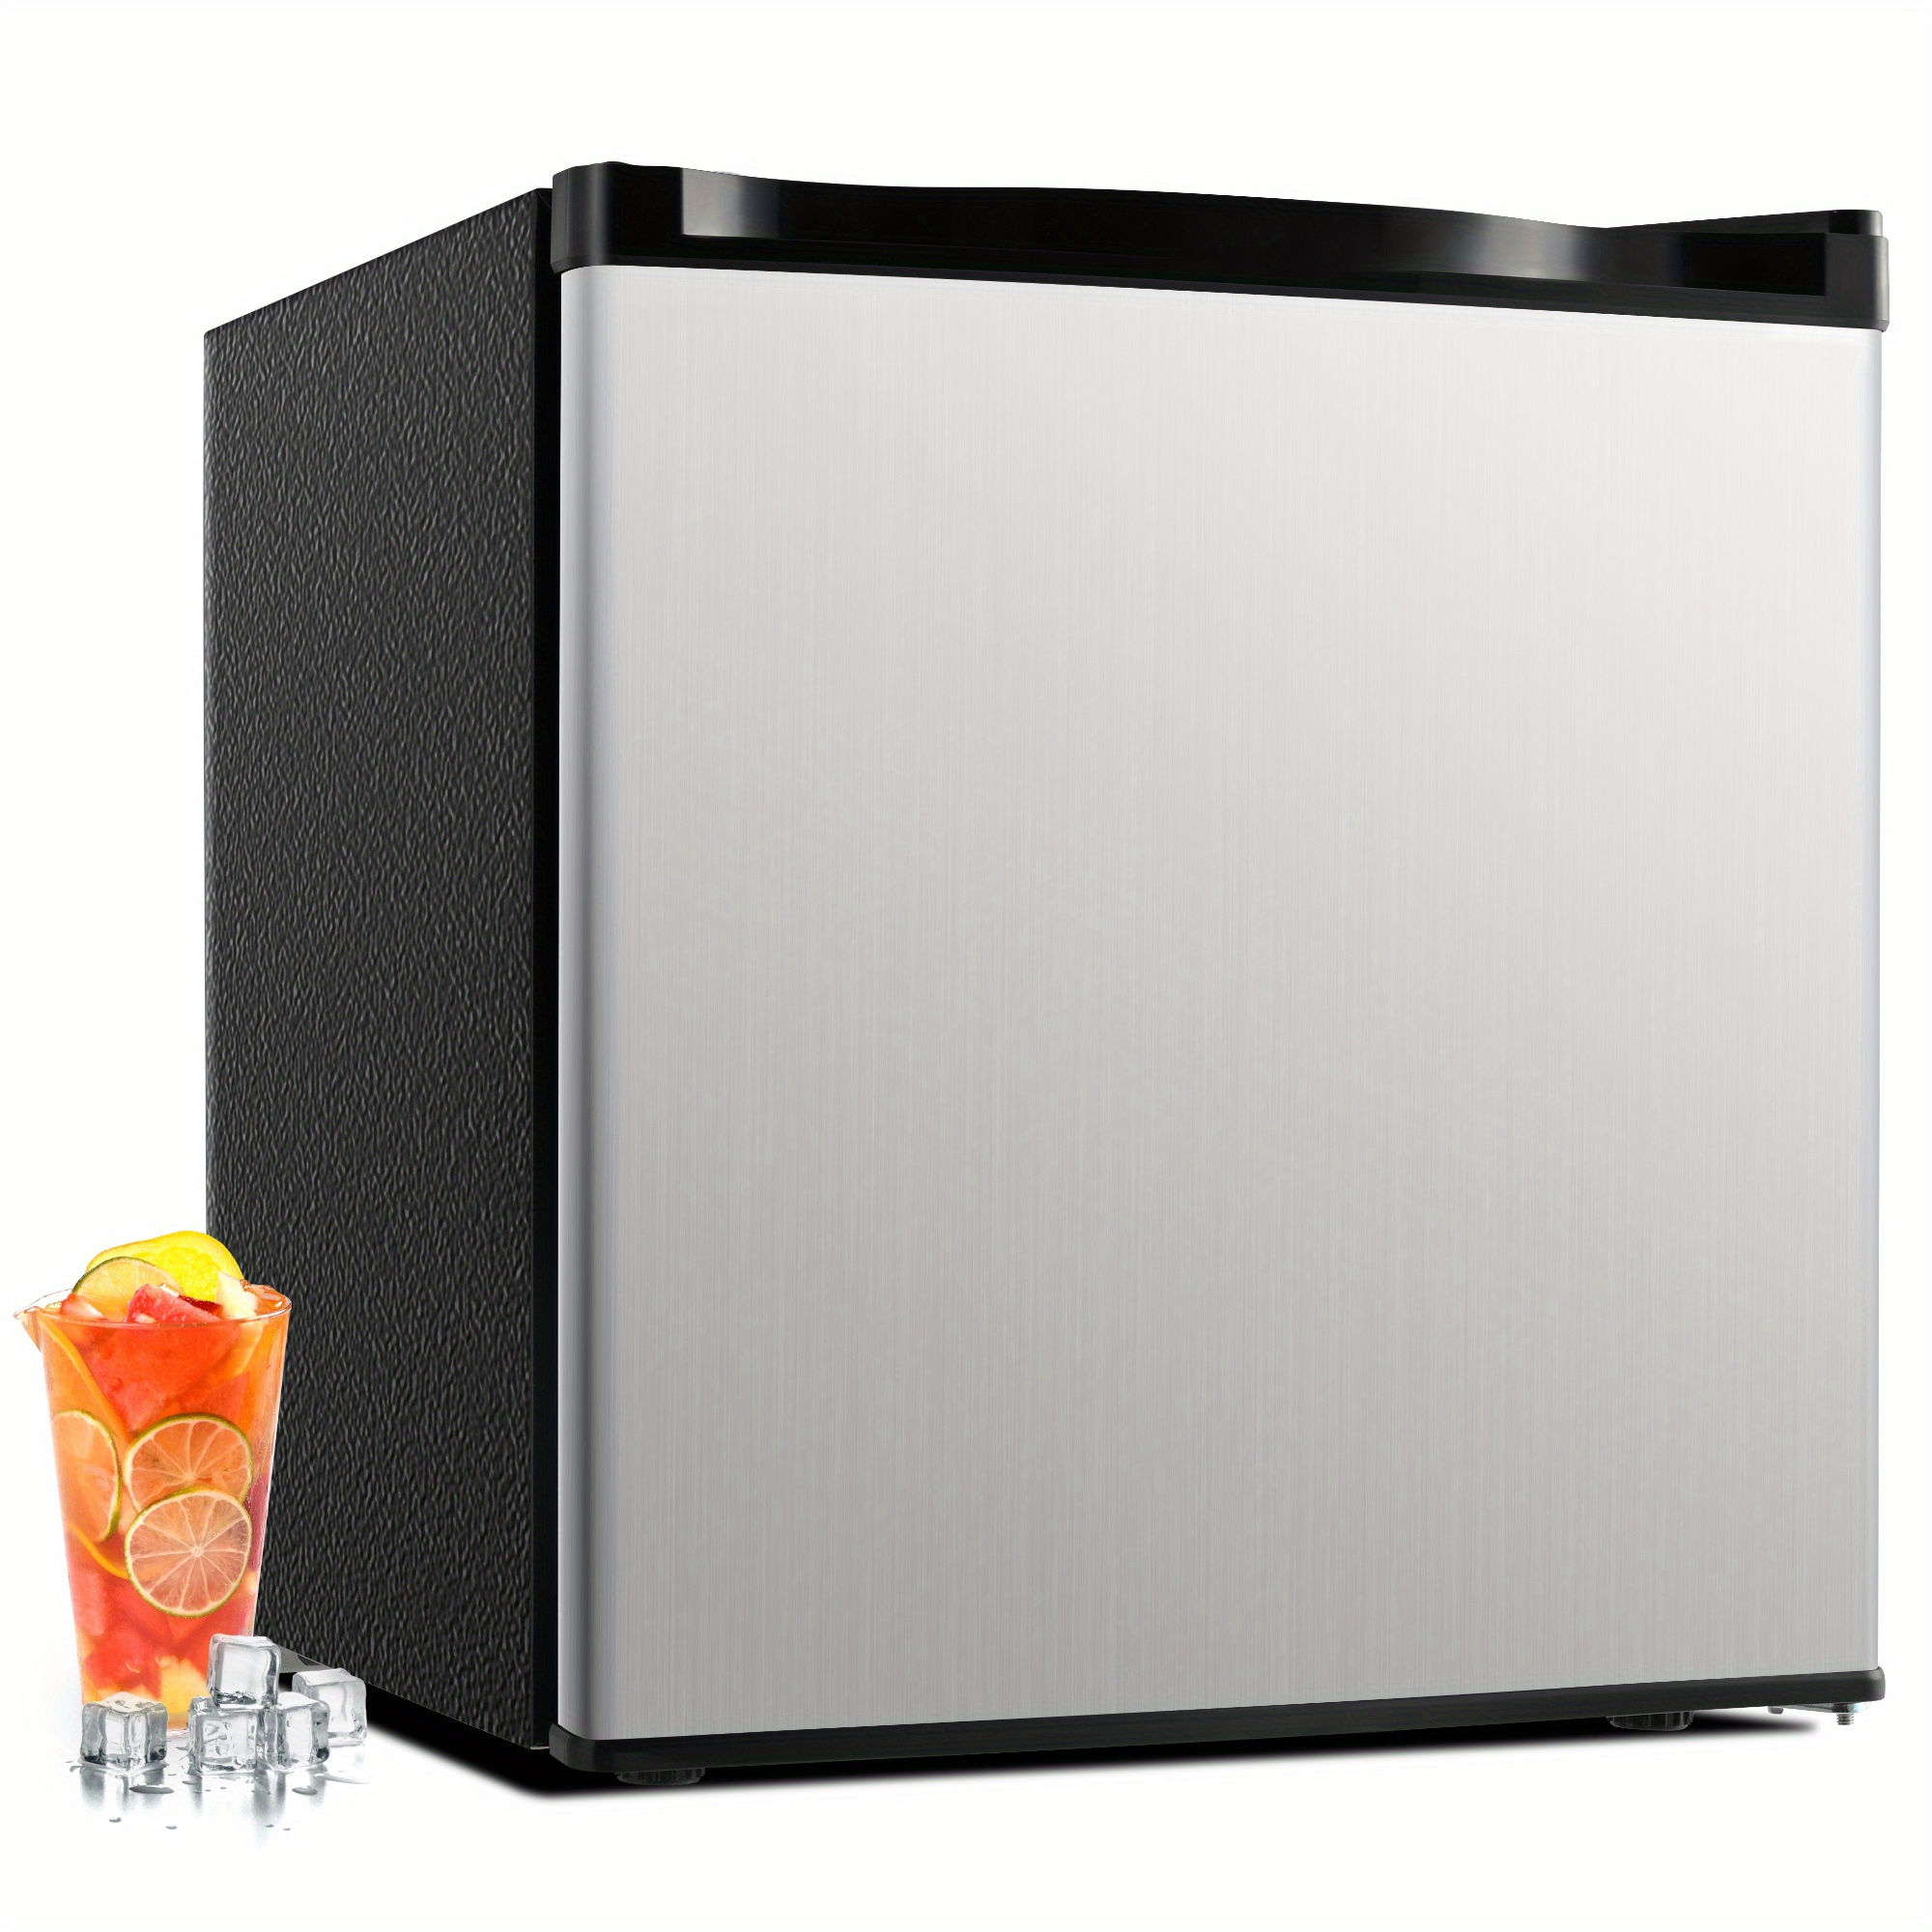 

Space-saving 1.7 Cu.ft Mini Fridge With Freezer: Adjustable Thermostat For Custom Cooling, Energy-efficient Design, Ideal For Bedroom, Office, Or Dorm